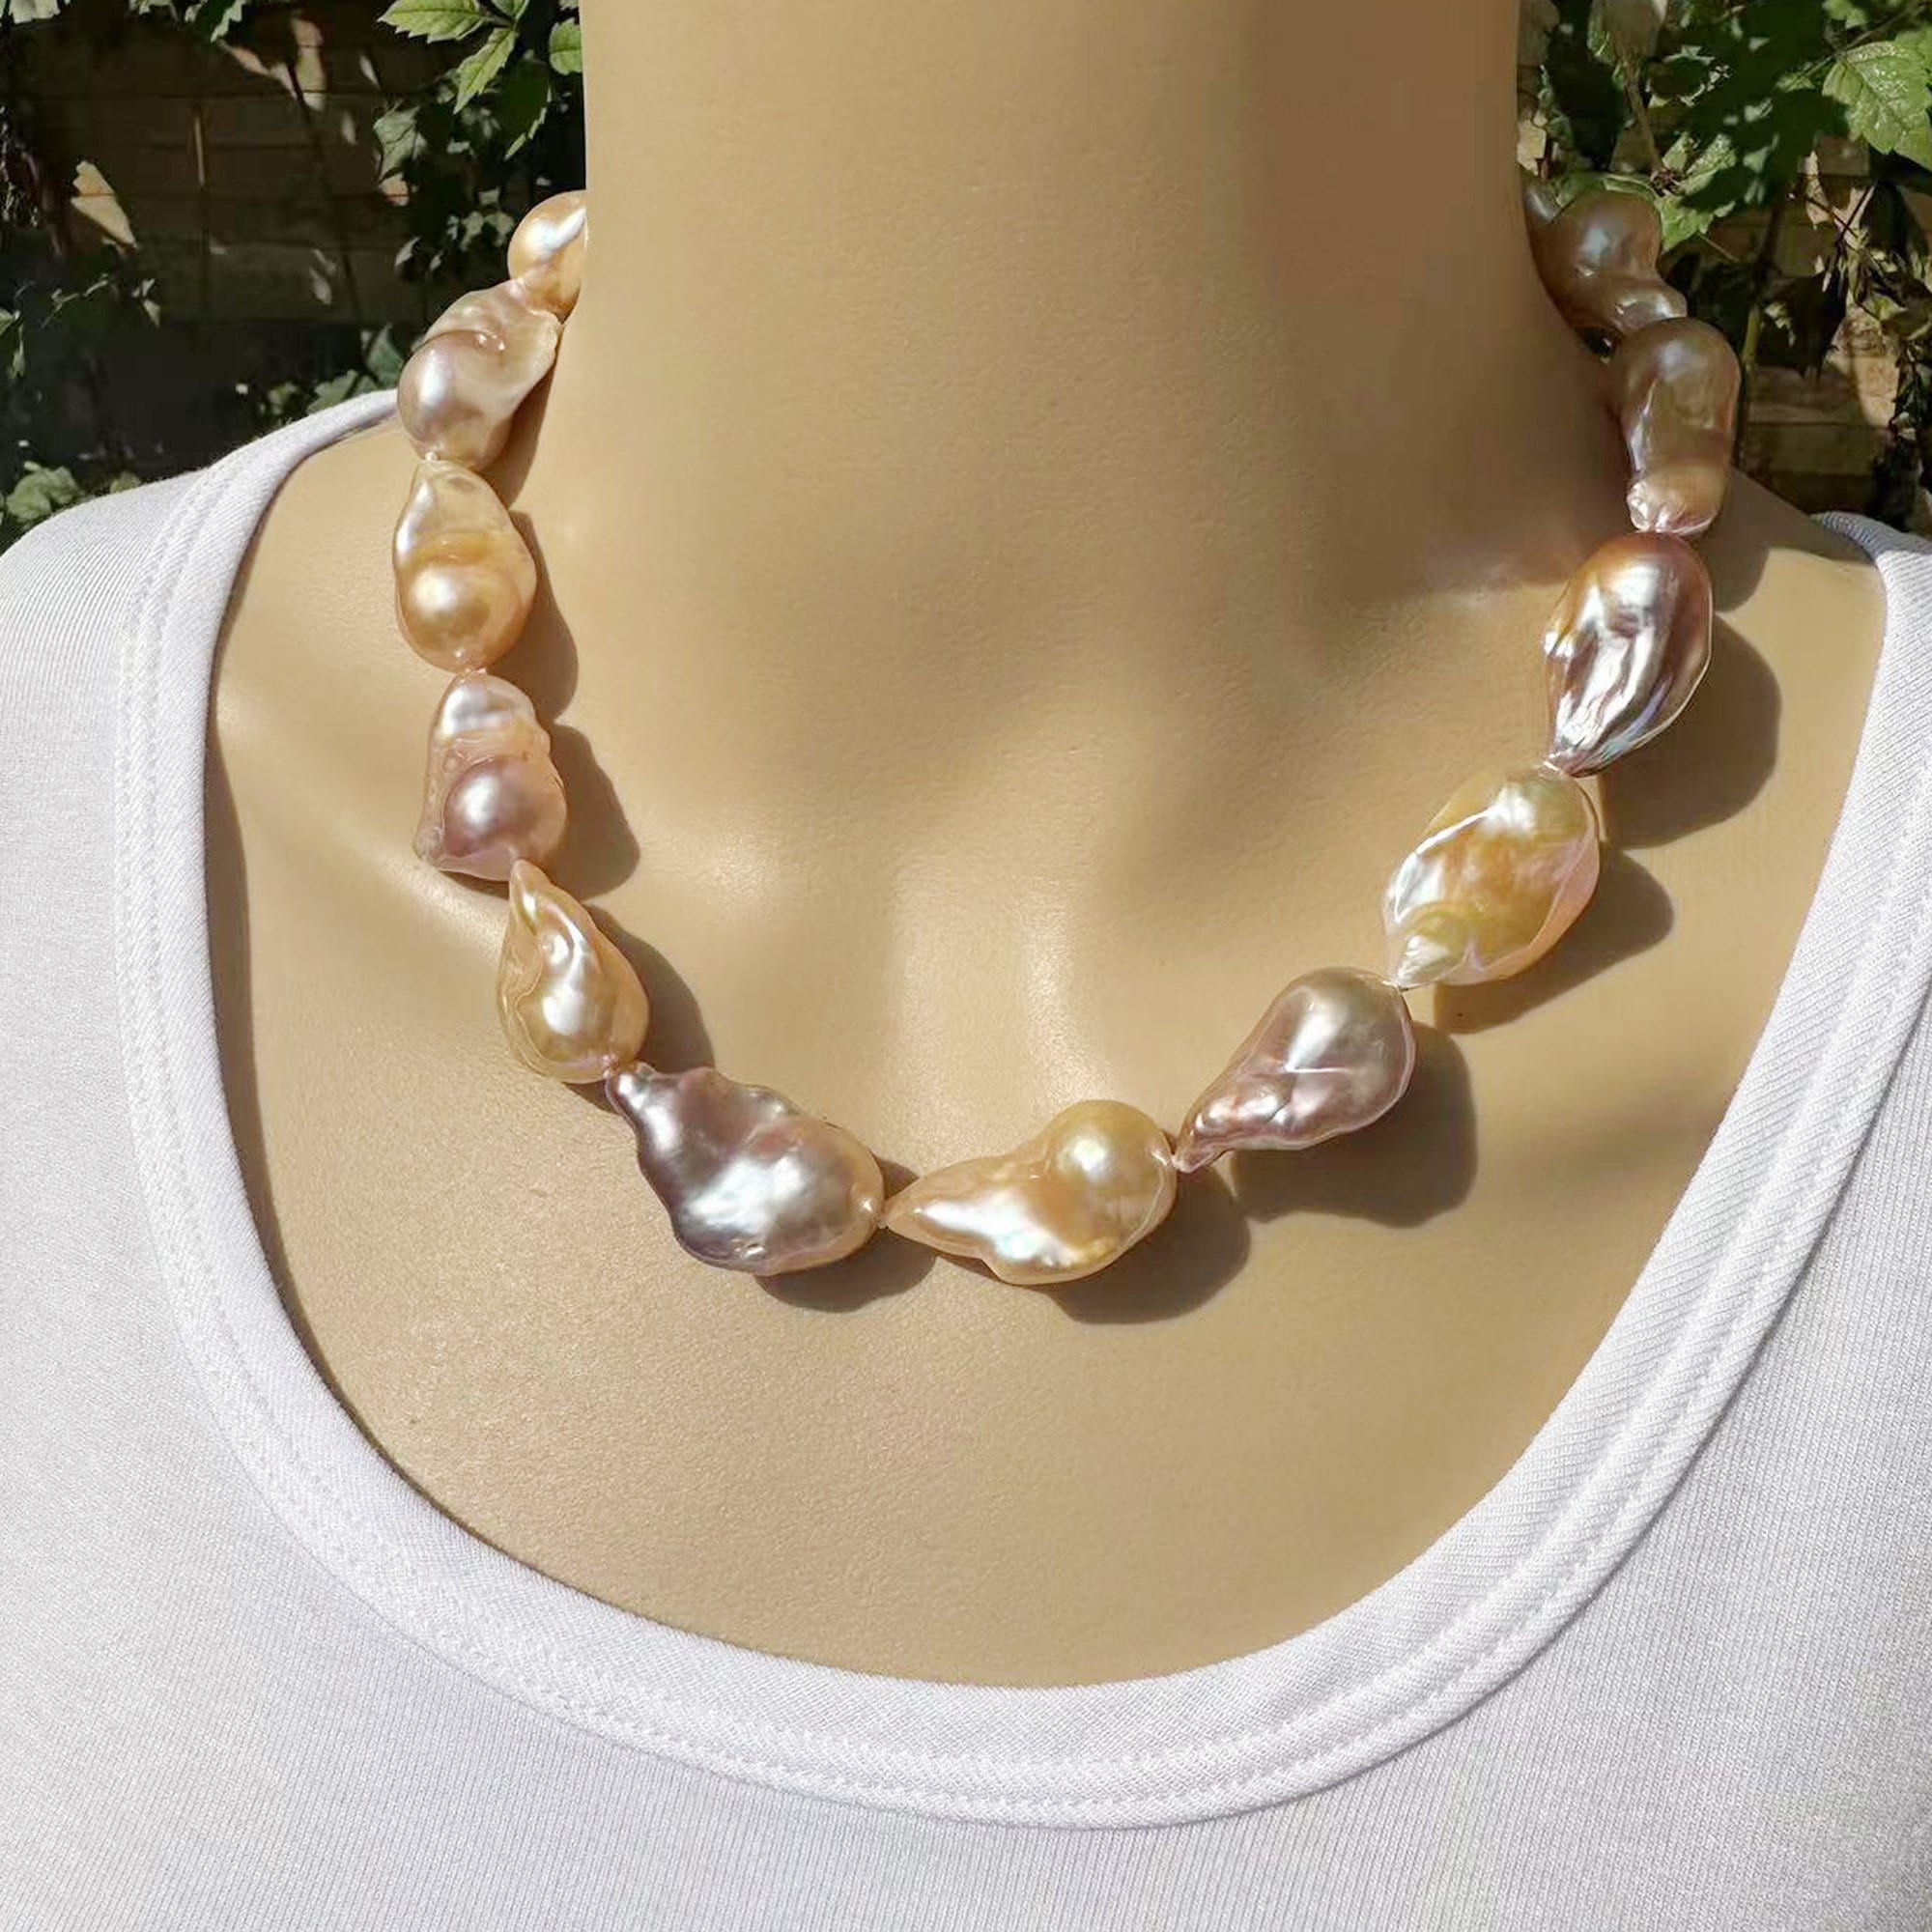 18inch 15-18x20-25mm Natural Color Large Baroque Pearl Necklace,freshwater  Jumbo Flameball Pearl Necklace,only ONE 